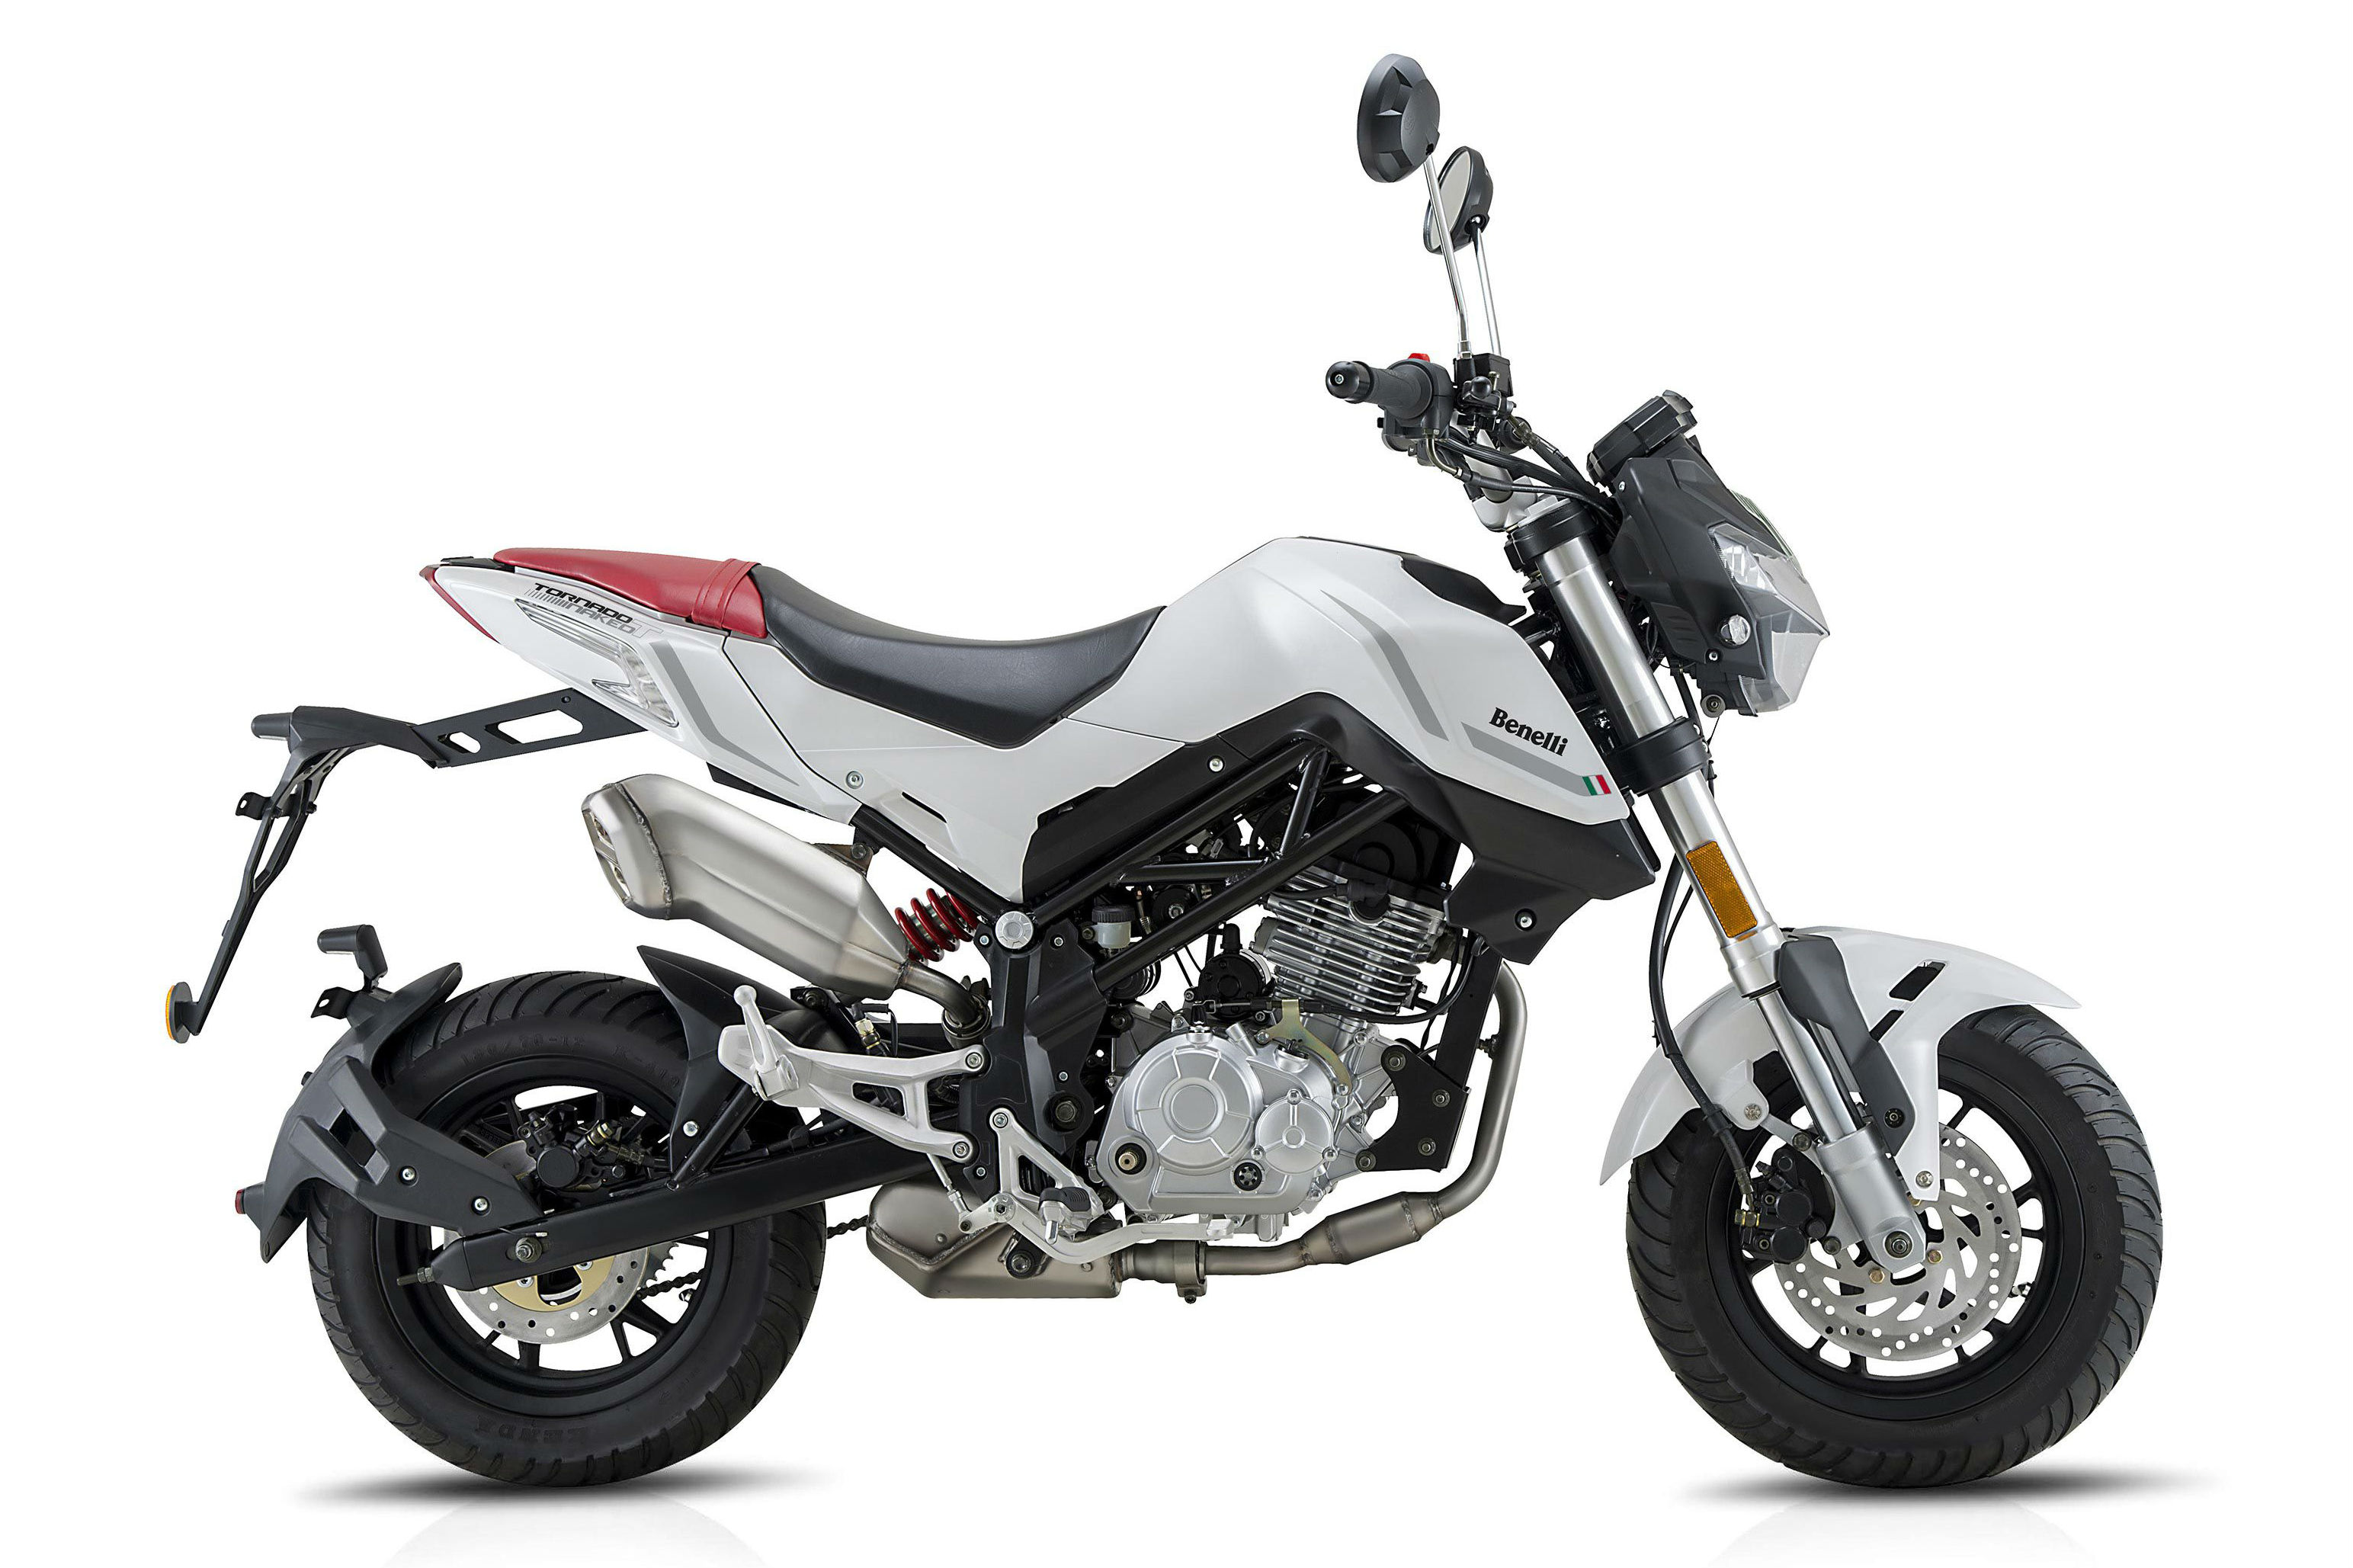 New Benelli range launched